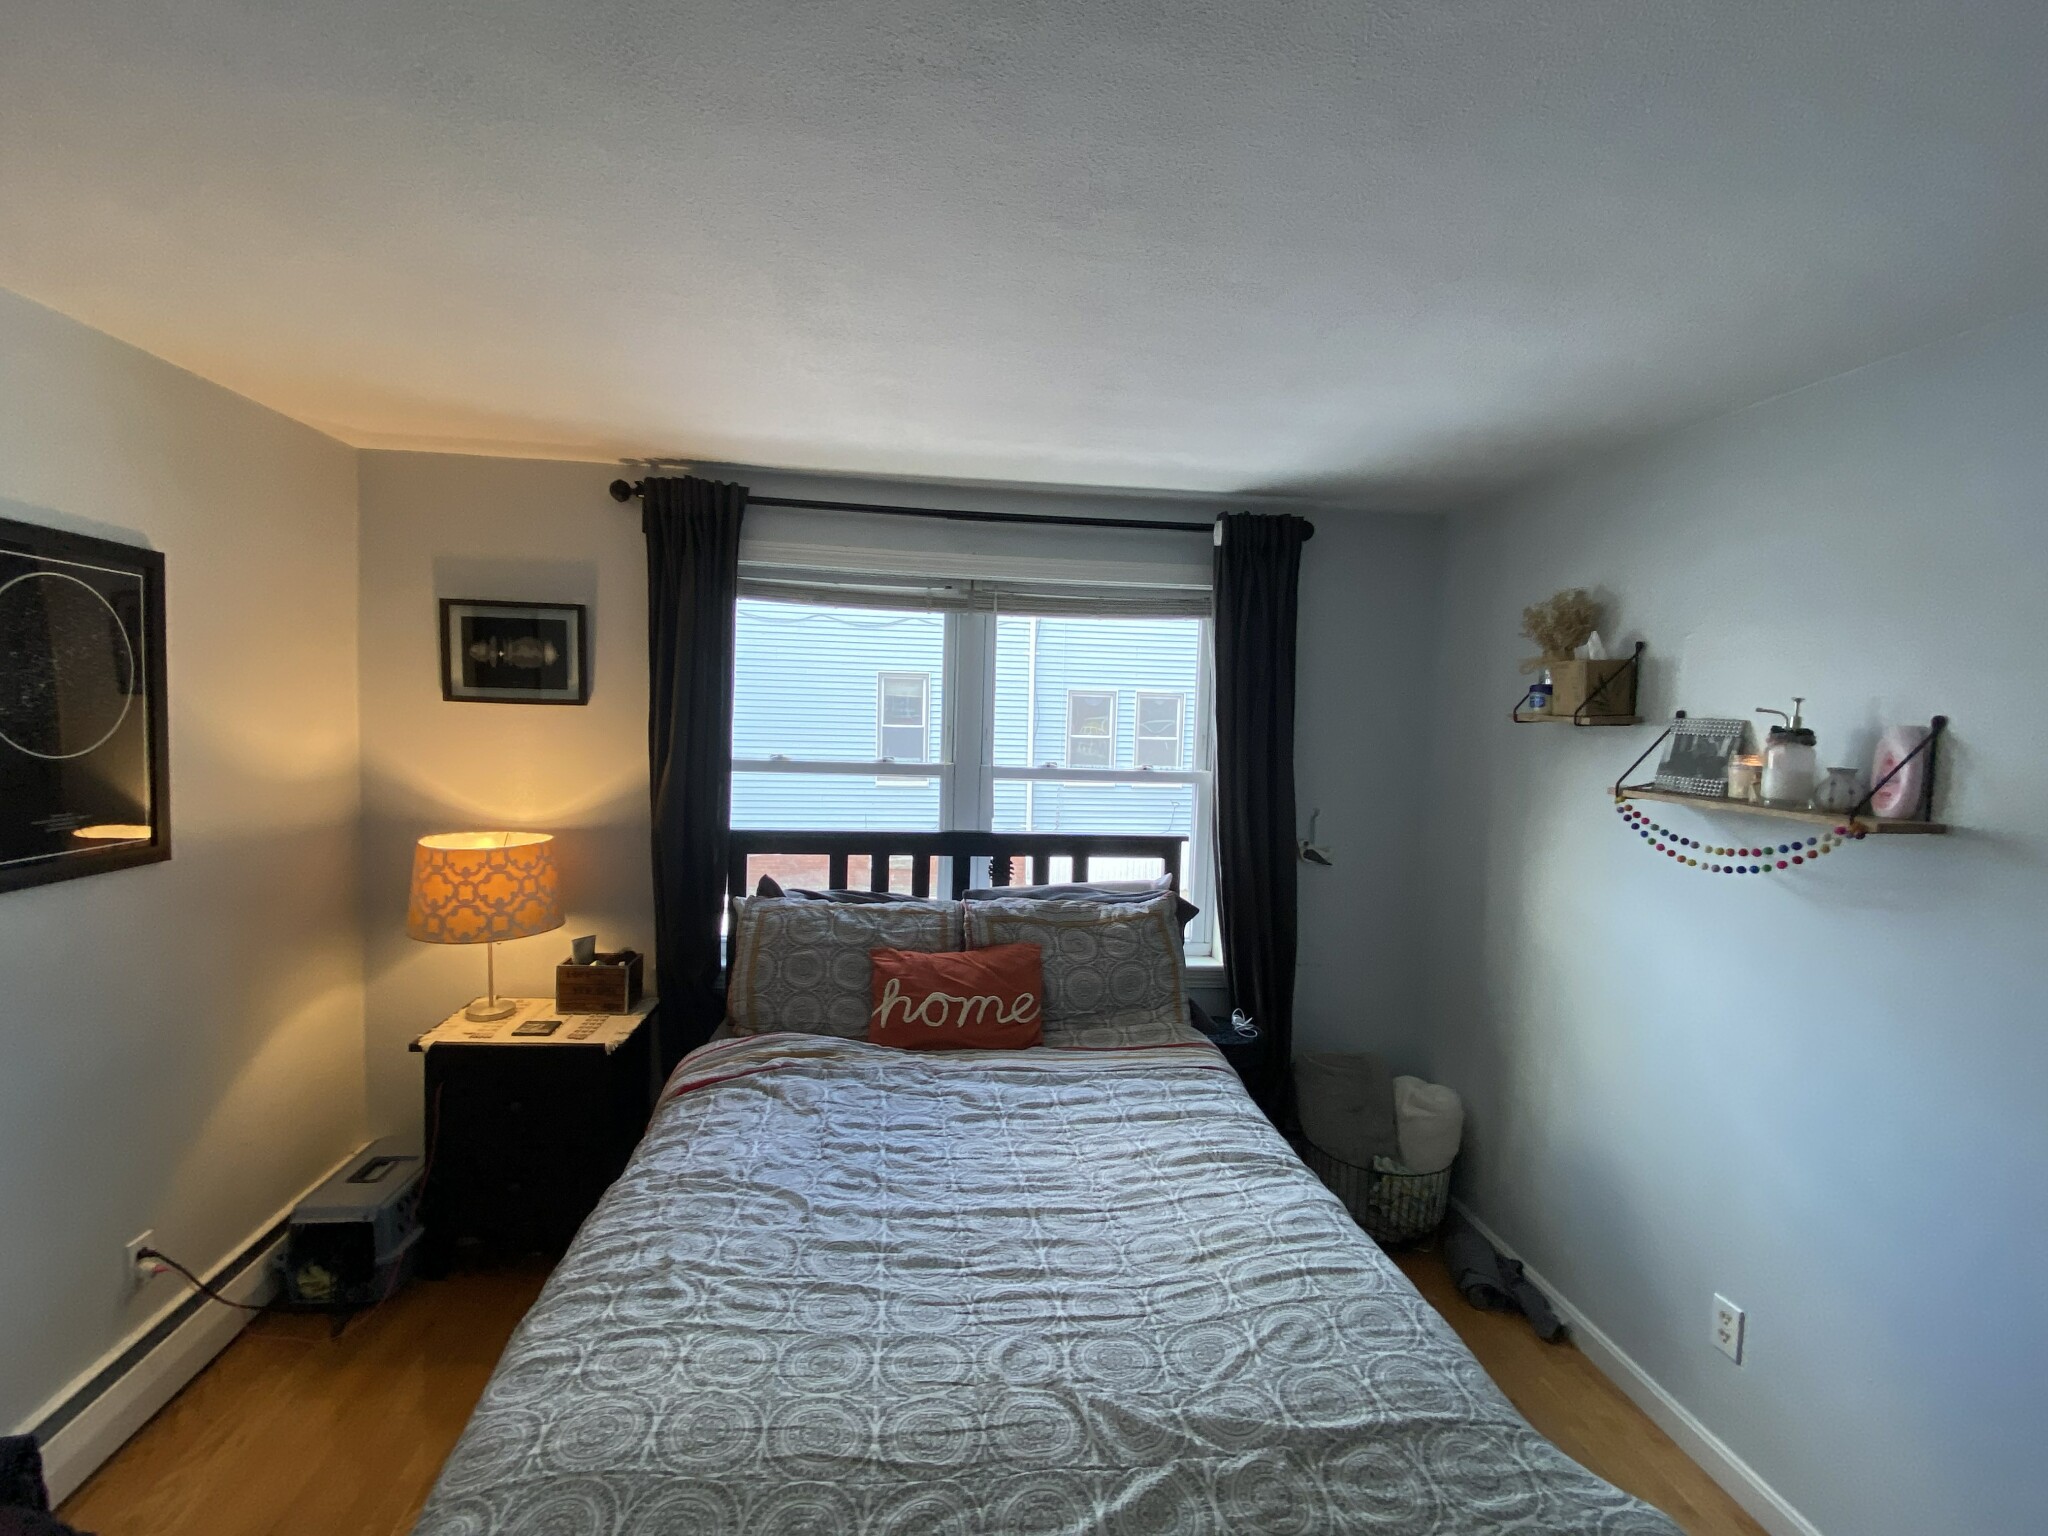 Photos of apartment on Somerville,Somerville MA 02143